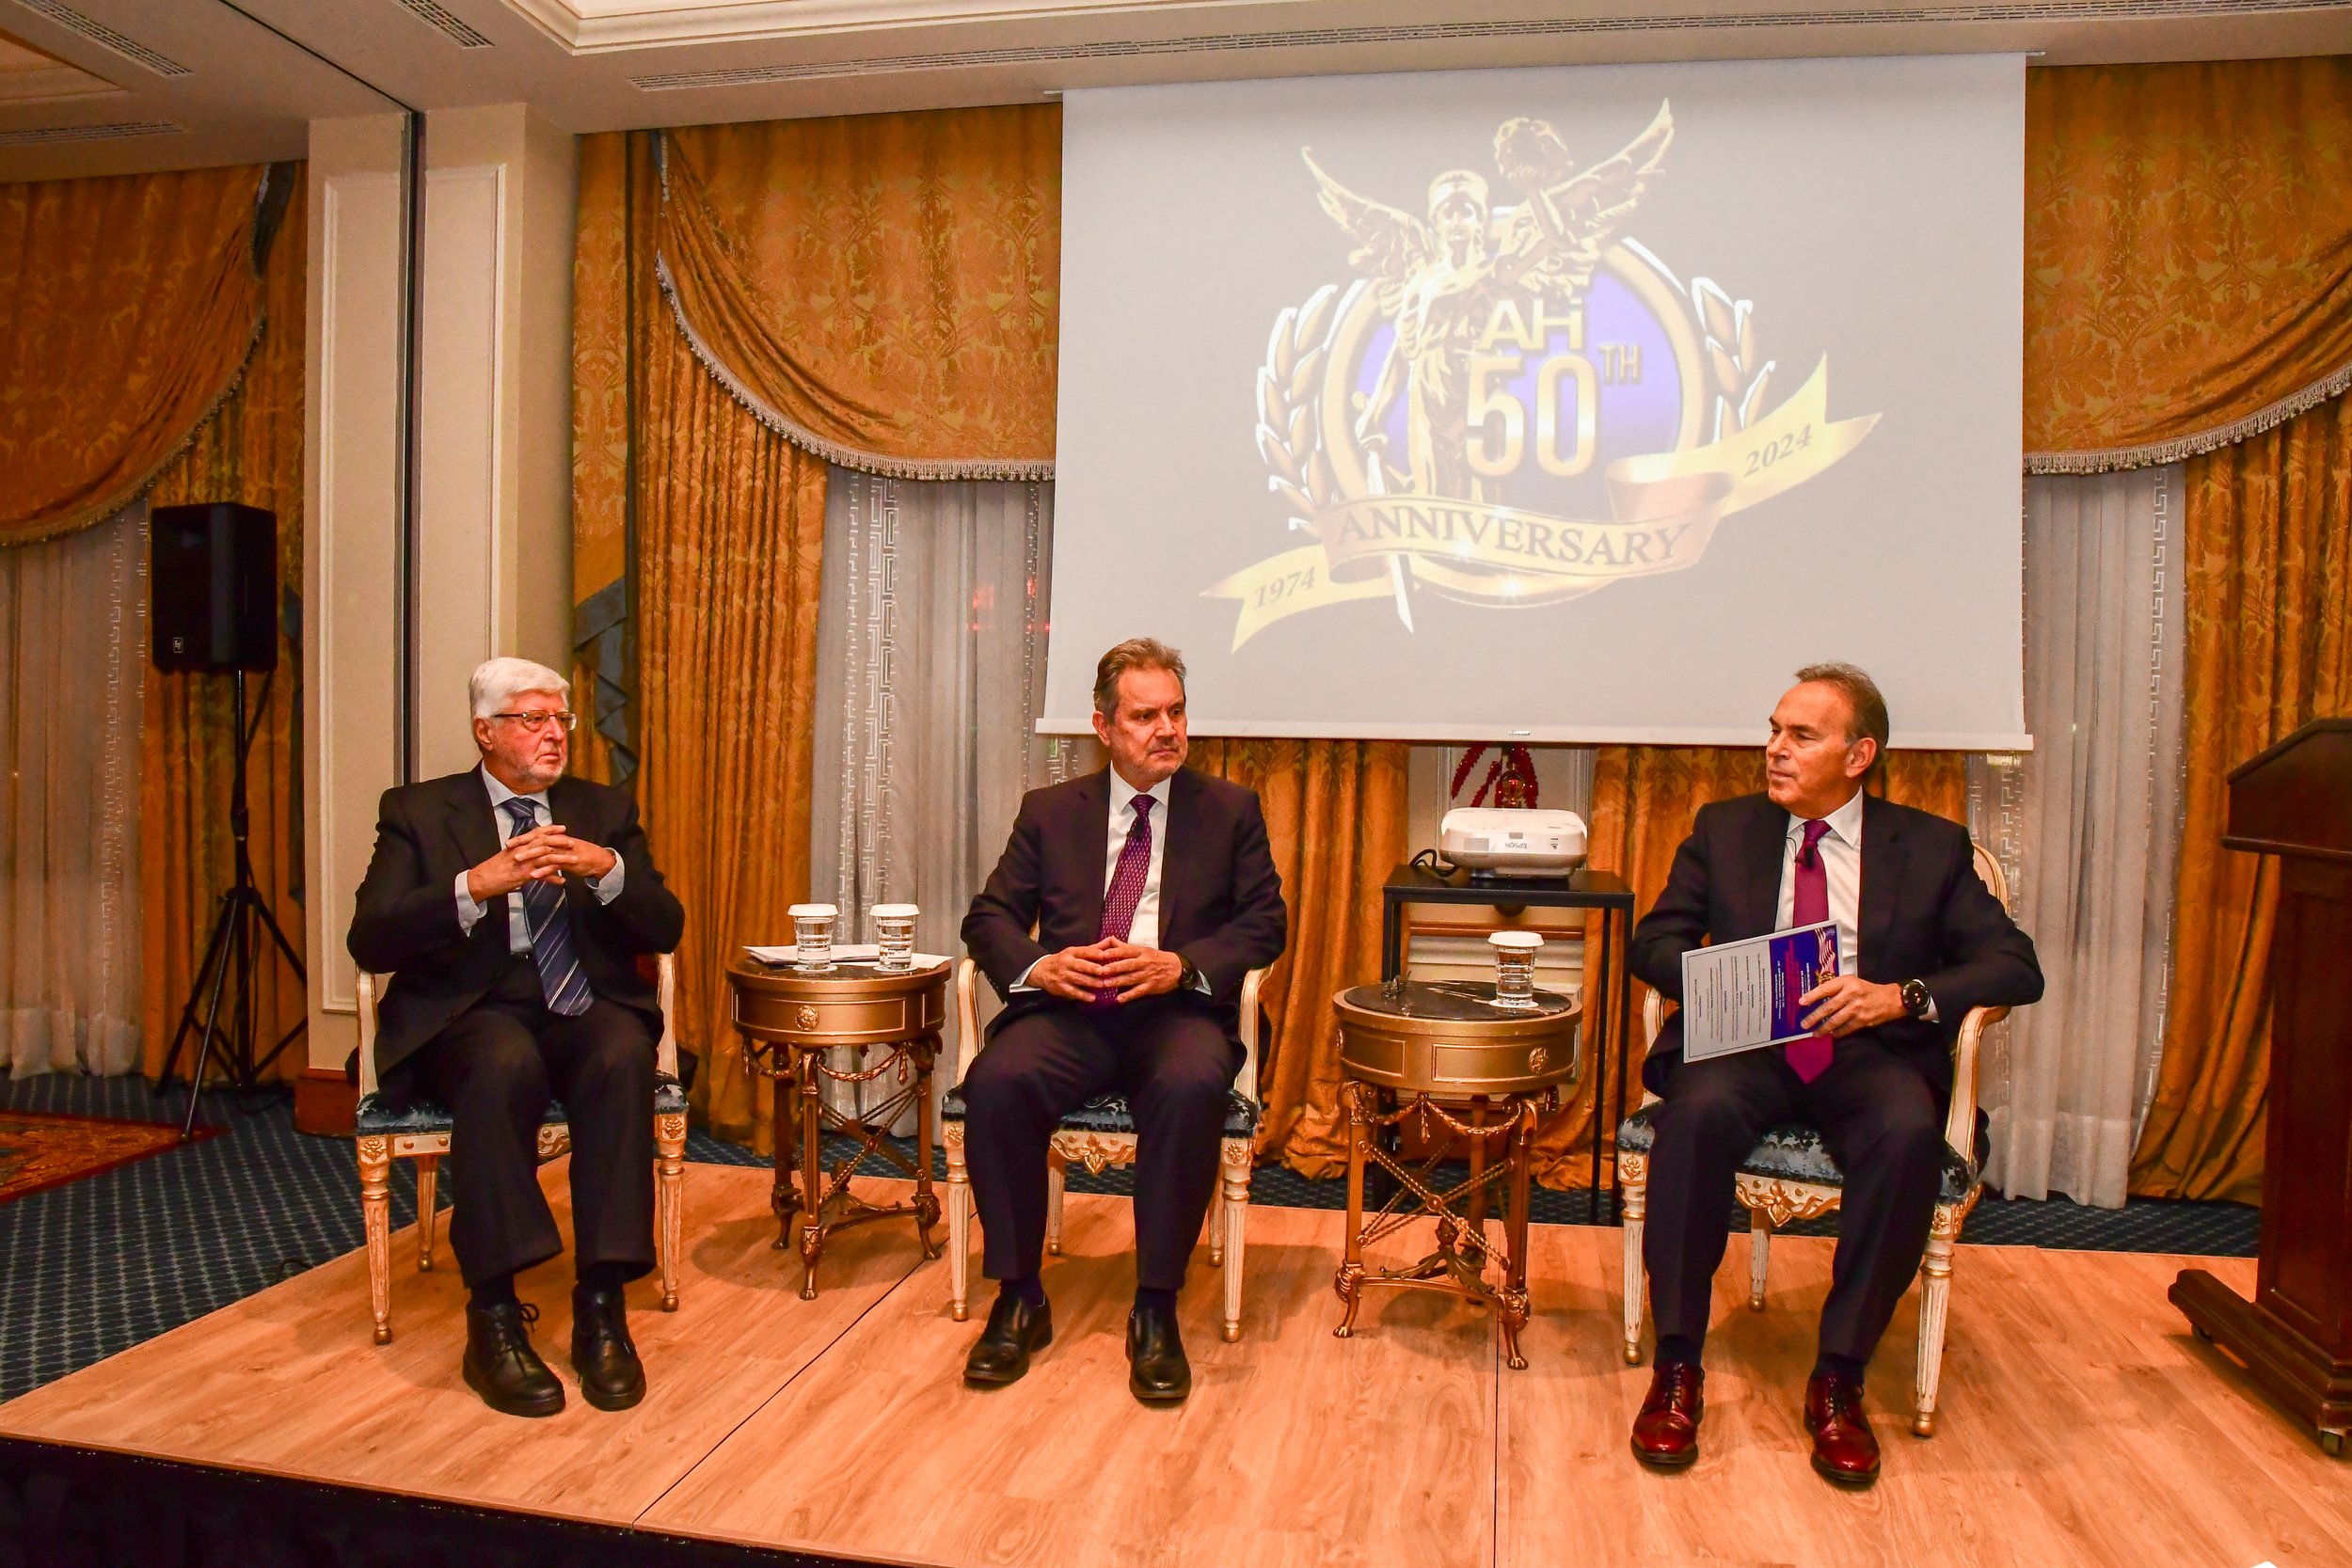  (Left to right) Speaker forum featuring Ambassador Alexandros Mallias, Ambassador Haris Lalacos, and Former Minister of Education and Religious Affairs of Greece Konstantinos Arvanitopoulos (Moderator) 